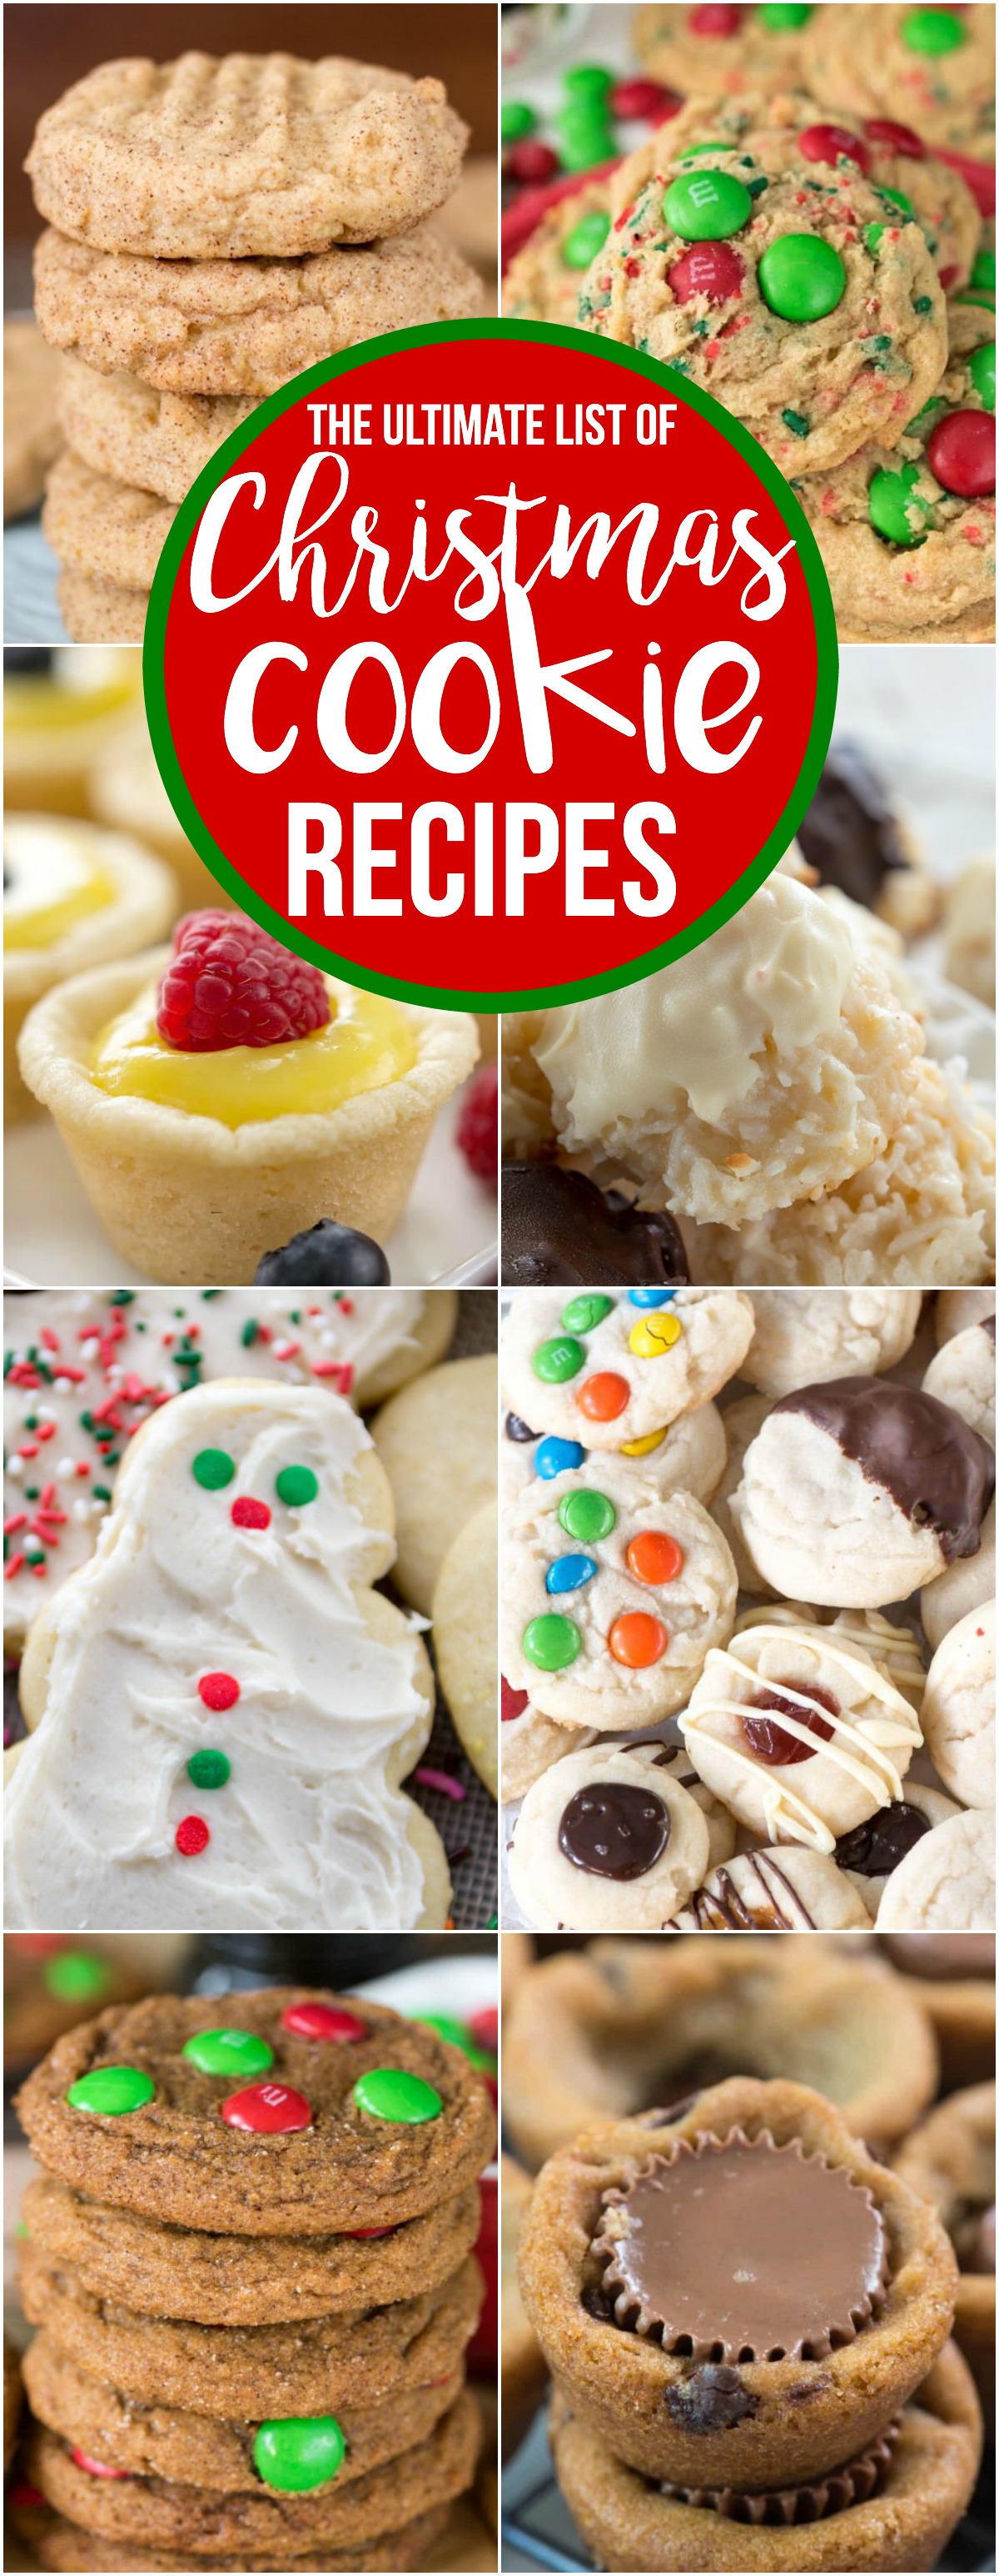 The Ultimate List of Christmas Cookies - Crazy for Crust